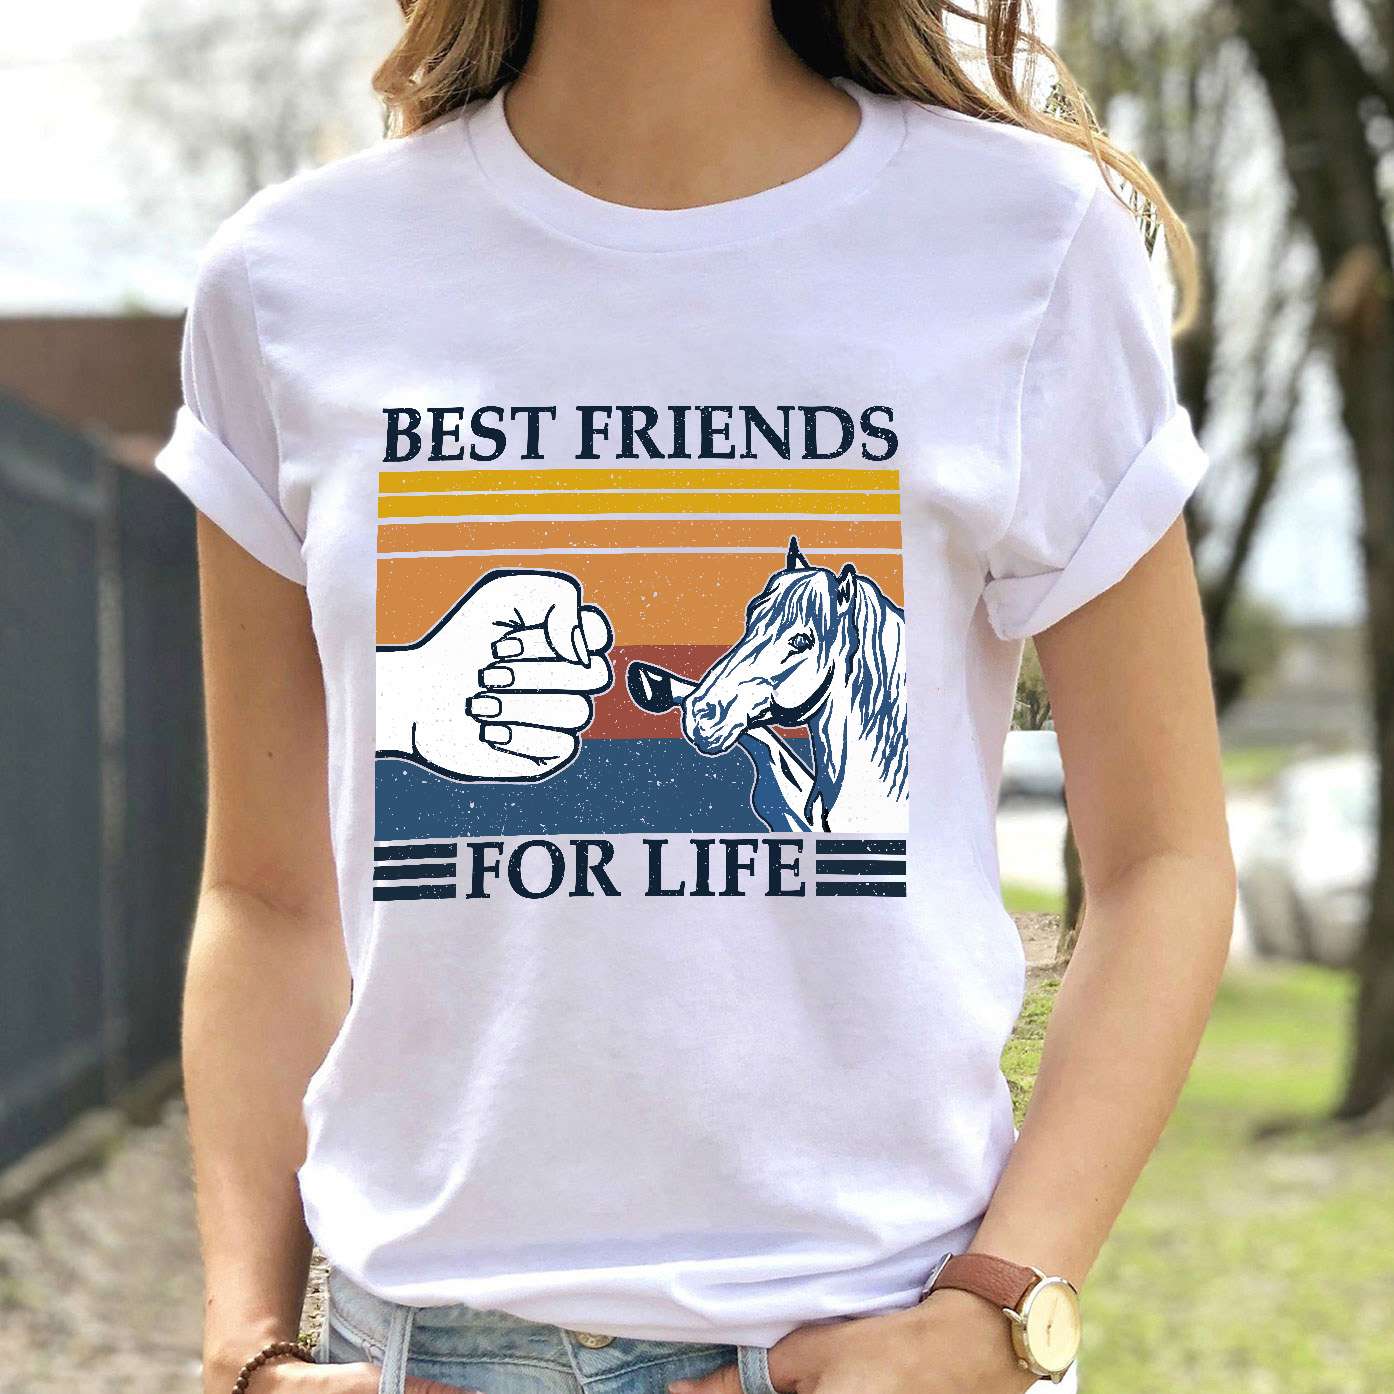 Best friends for life - Horse best friends, friend for life